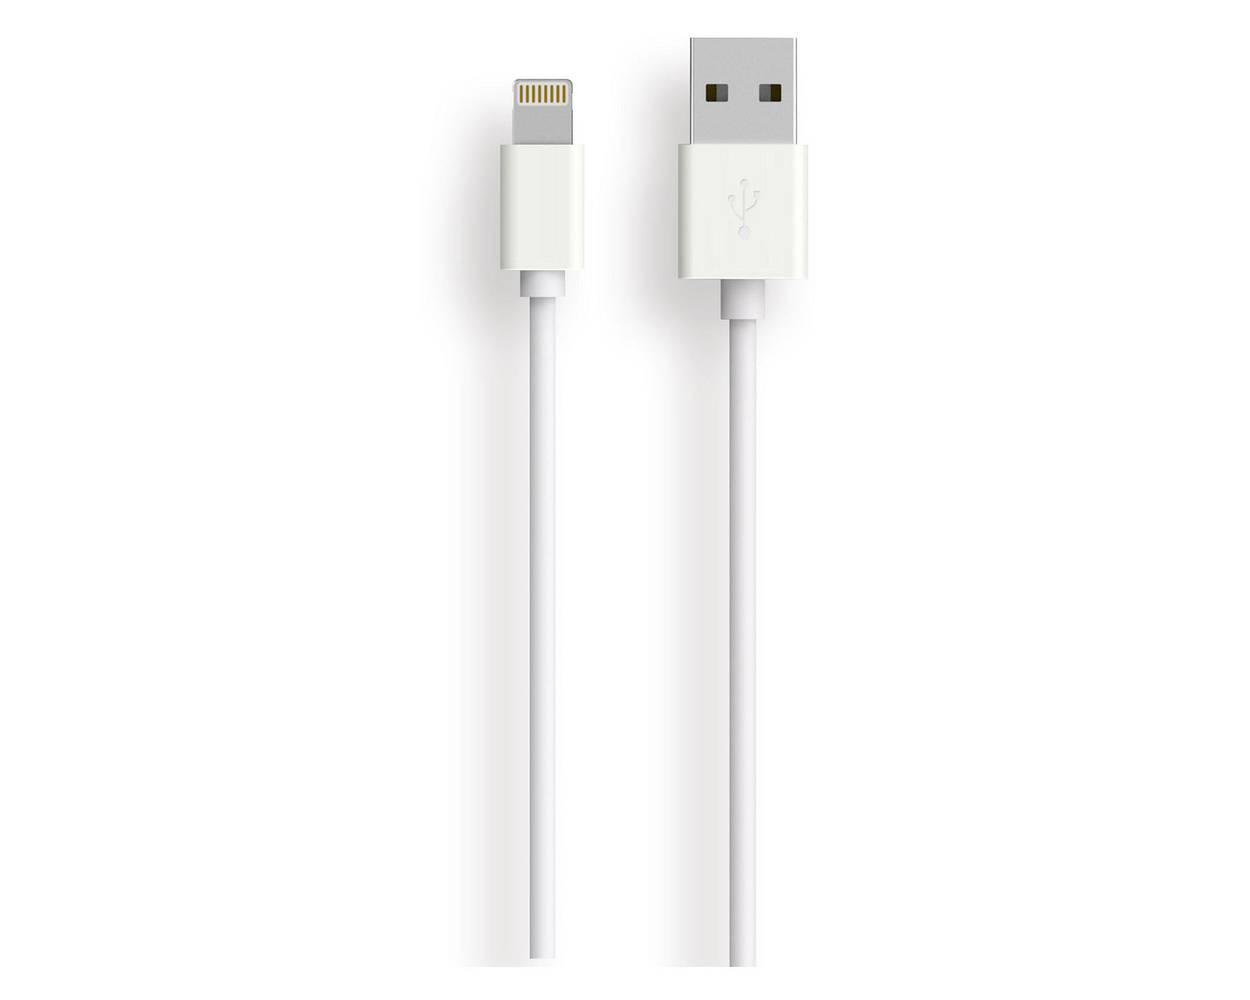 Fiddler cable iphone 5/6 (1 cable iphone 5/6 )